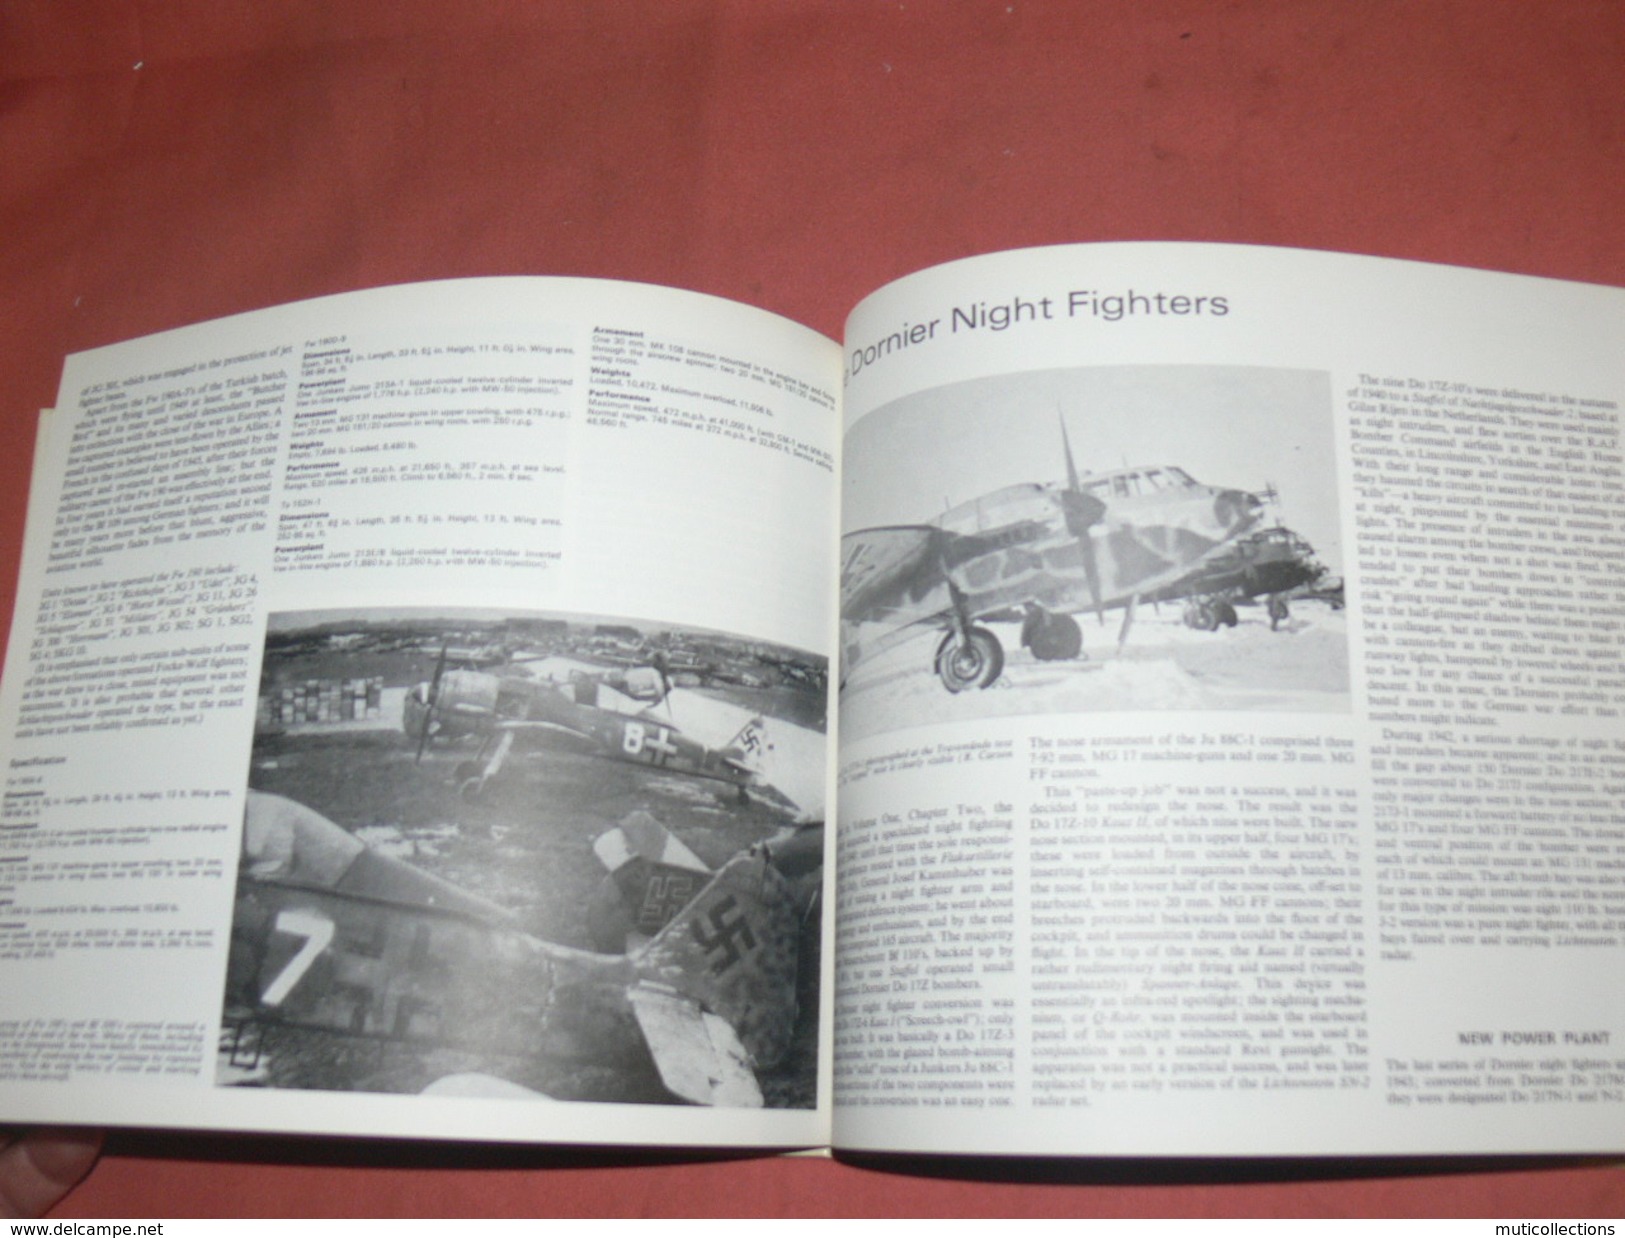 AVION MILITARIA / GUERRE WWII /  GERMAN AIR FORCE FIGHTERS  / VOLUME 2 / HYLTON LACY PUBLISHERS 1971